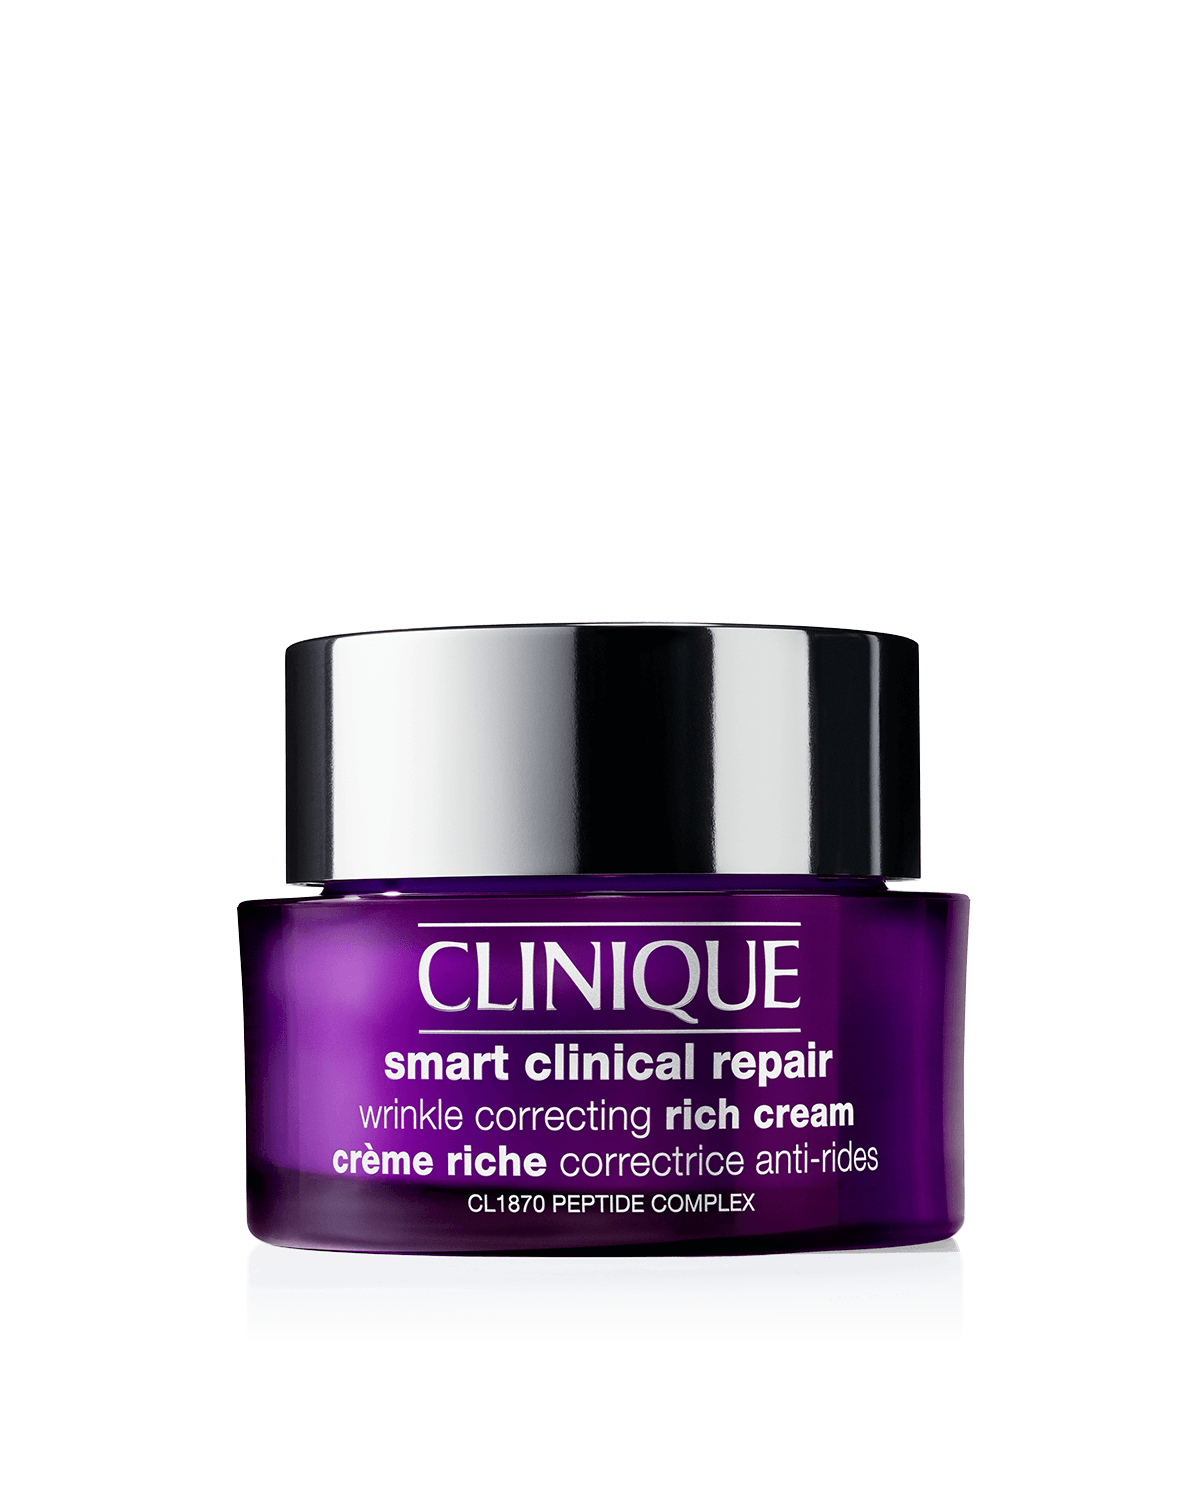 NEW Clinique Smart Clinical Repair™ Wrinkle Correcting Rich Cream